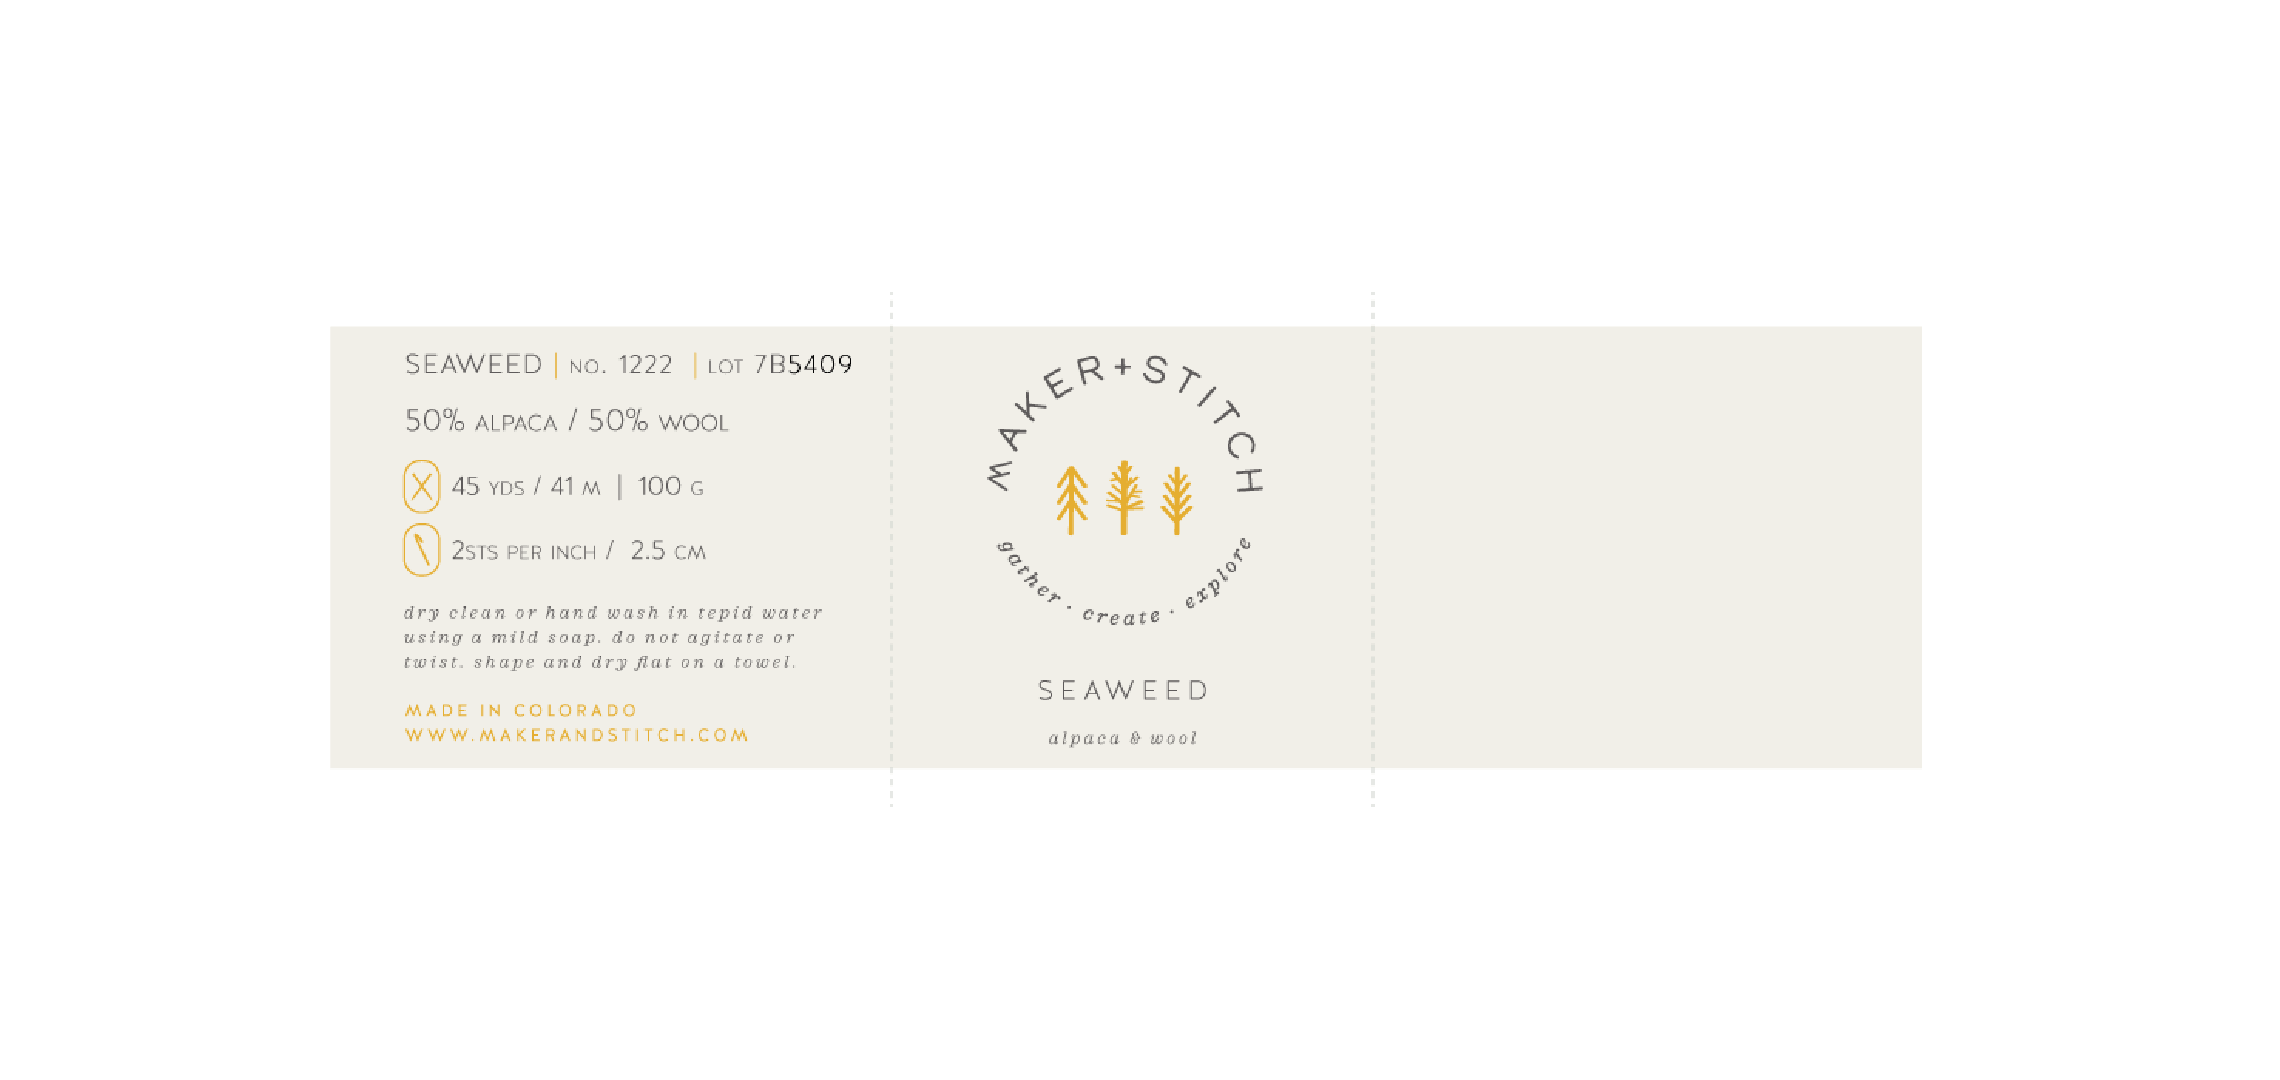 Maker + Stitch - yarn label packaging design for a brick and mortar knitting shop.